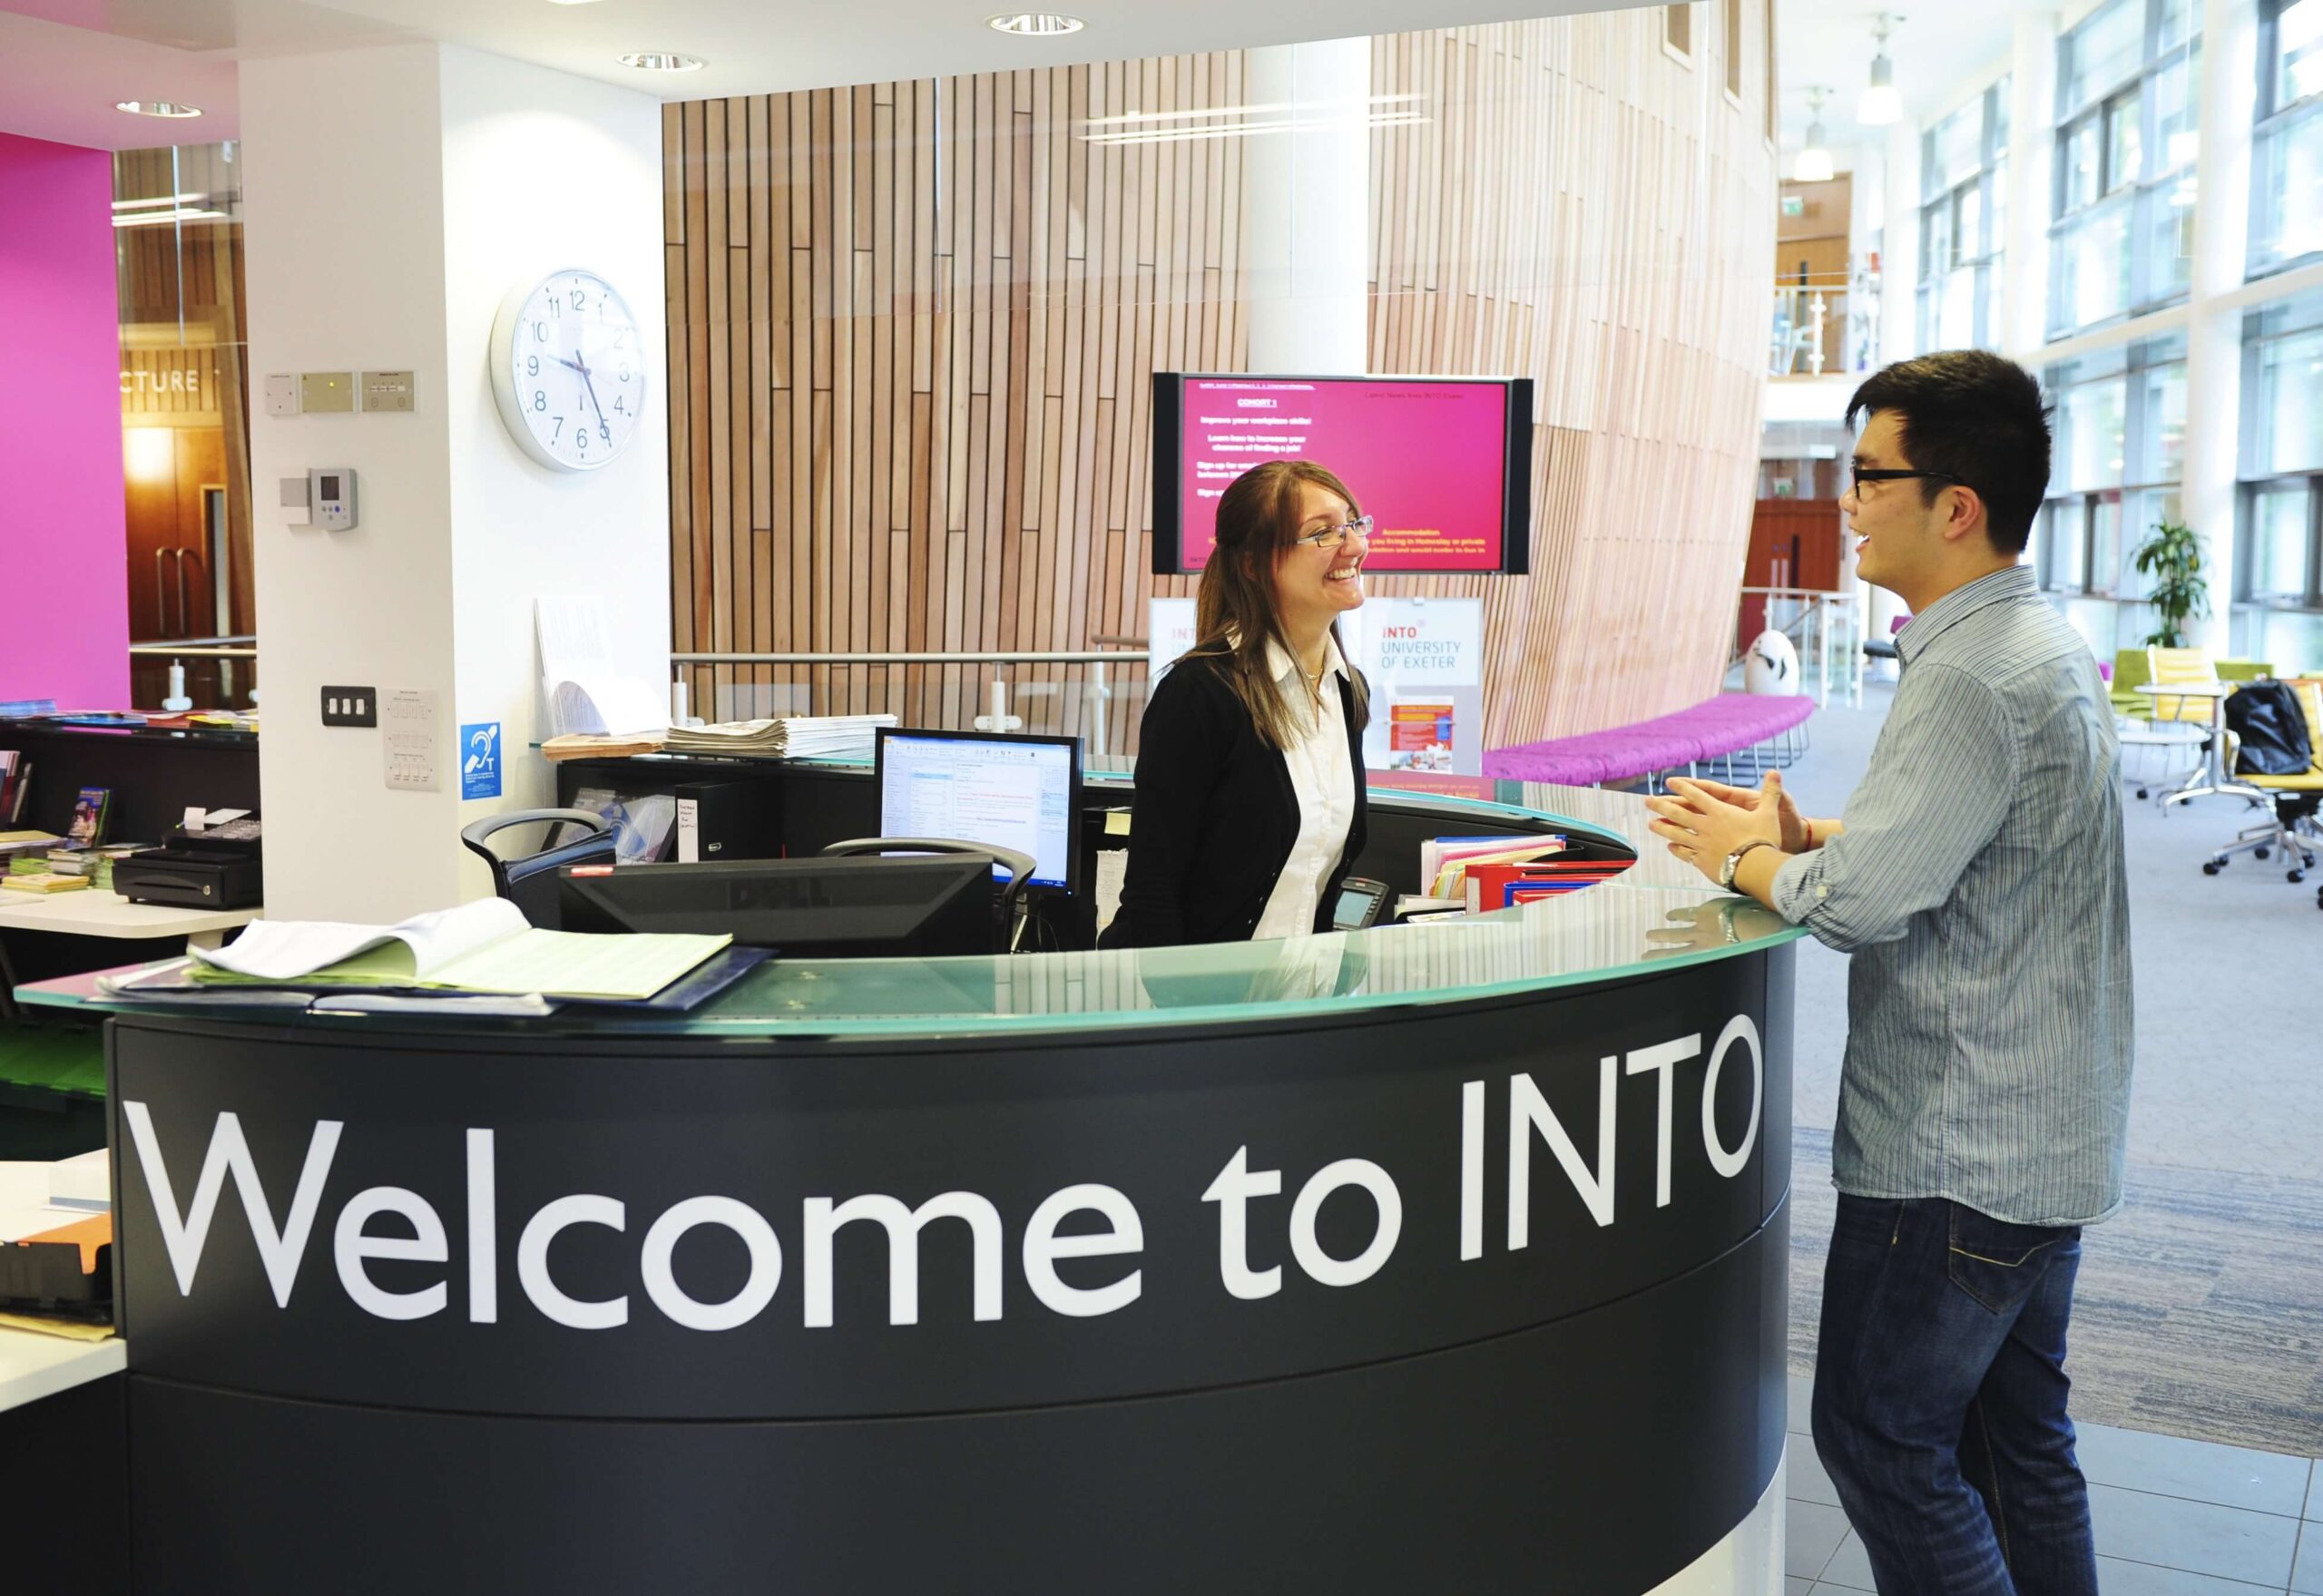 Staff helping student at INTO Exeter Reception